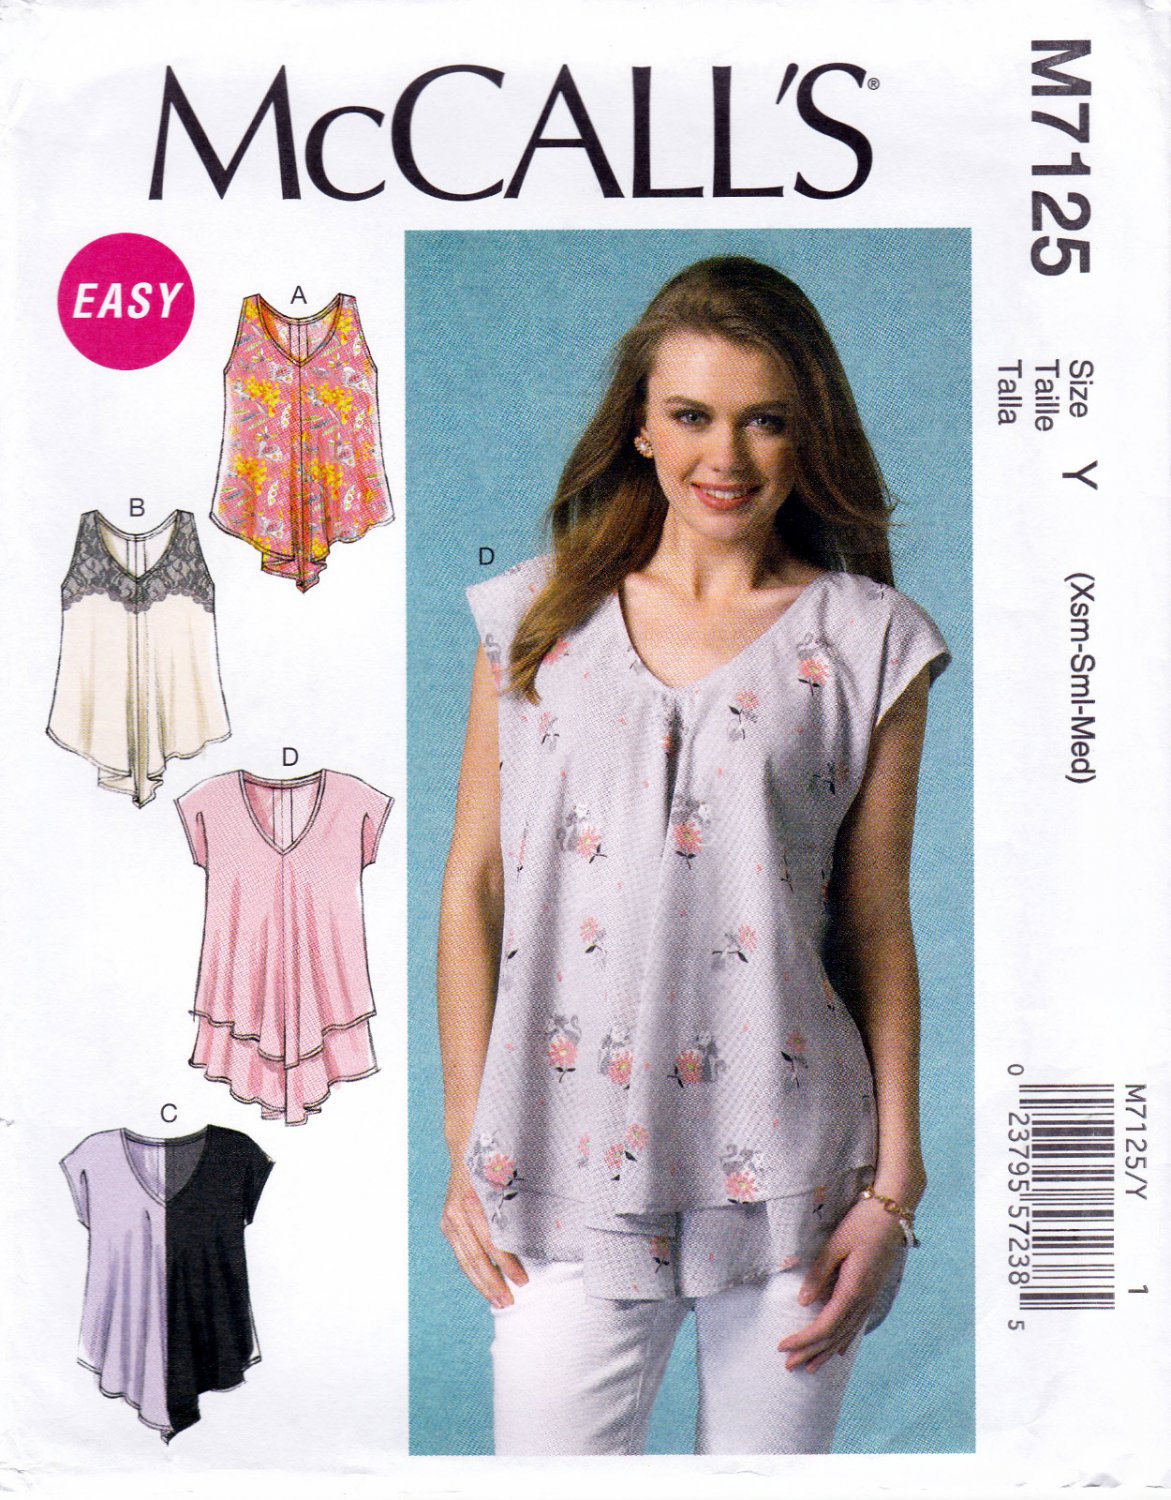 McCall's M7125 7125 Misses Loose Fitting Pullover Tops Sewing Pattern Sizes Xsm-Sml-Med Easy Sew